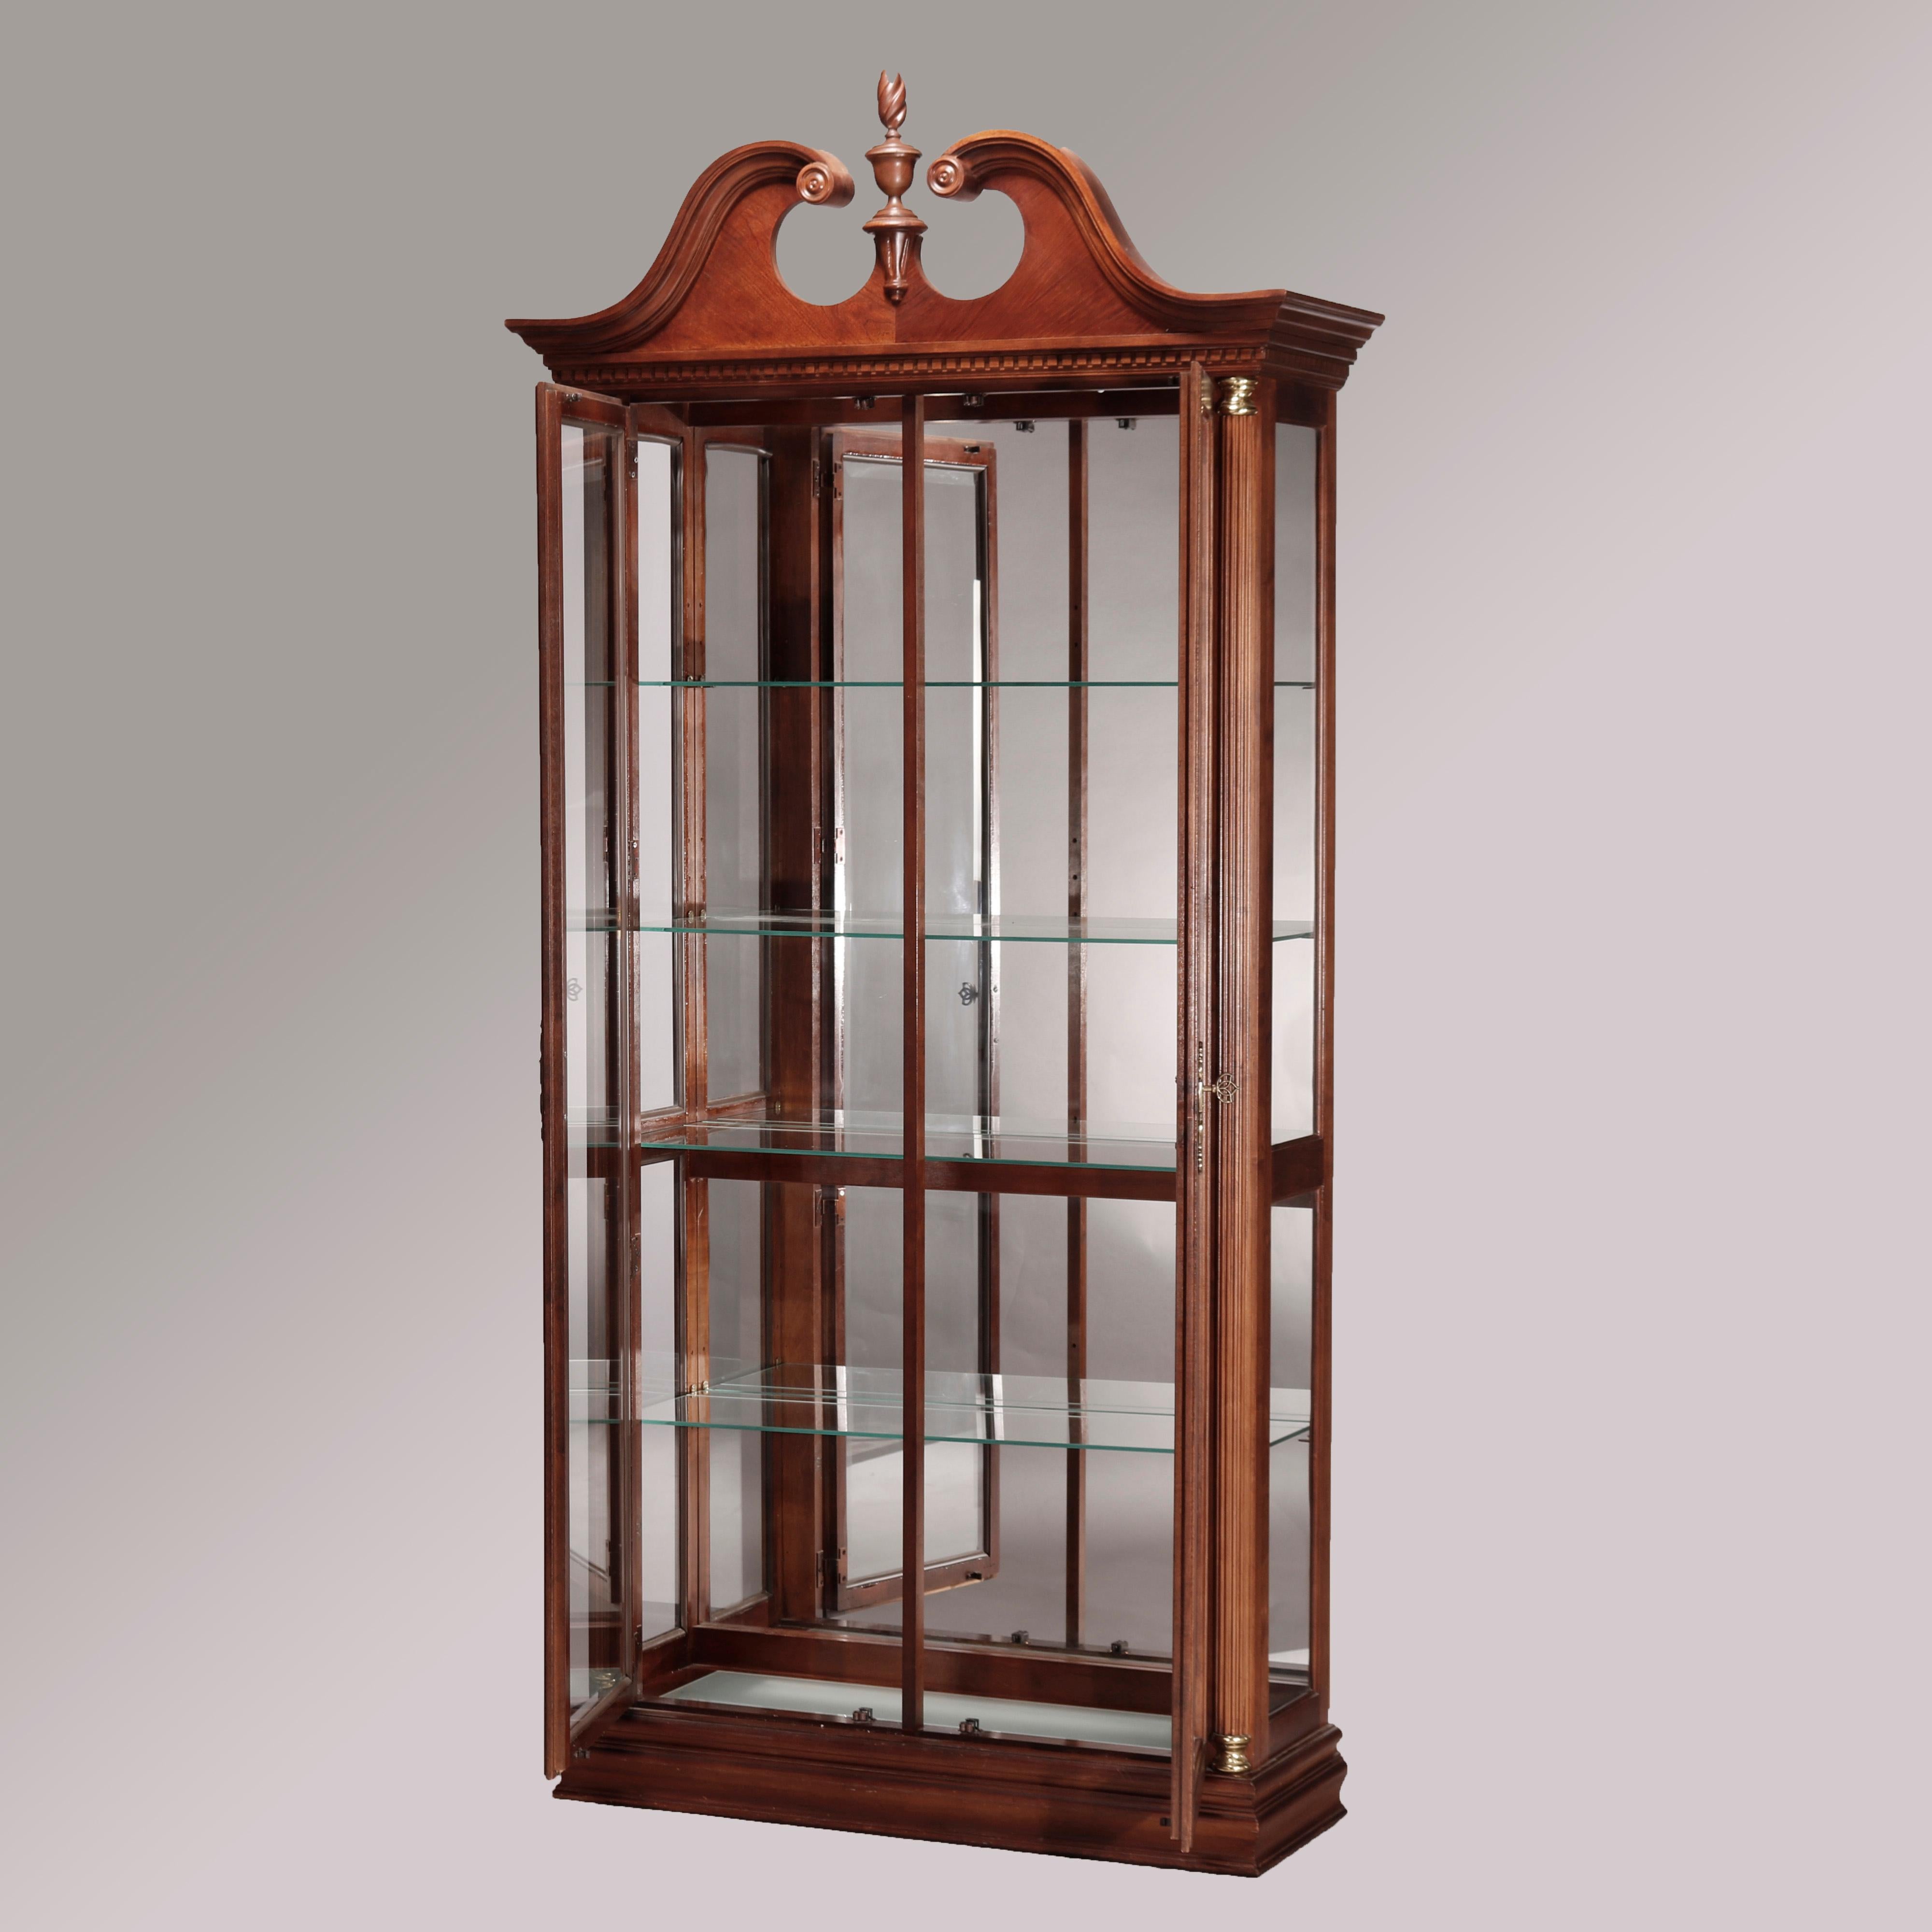 A Federal style display case by Pulaski offers mahogany construction with broken arch crest having central carved finial over case having double glass doors opening to shelved and mirrored interior, flanking reeded Greco Doric style columns with